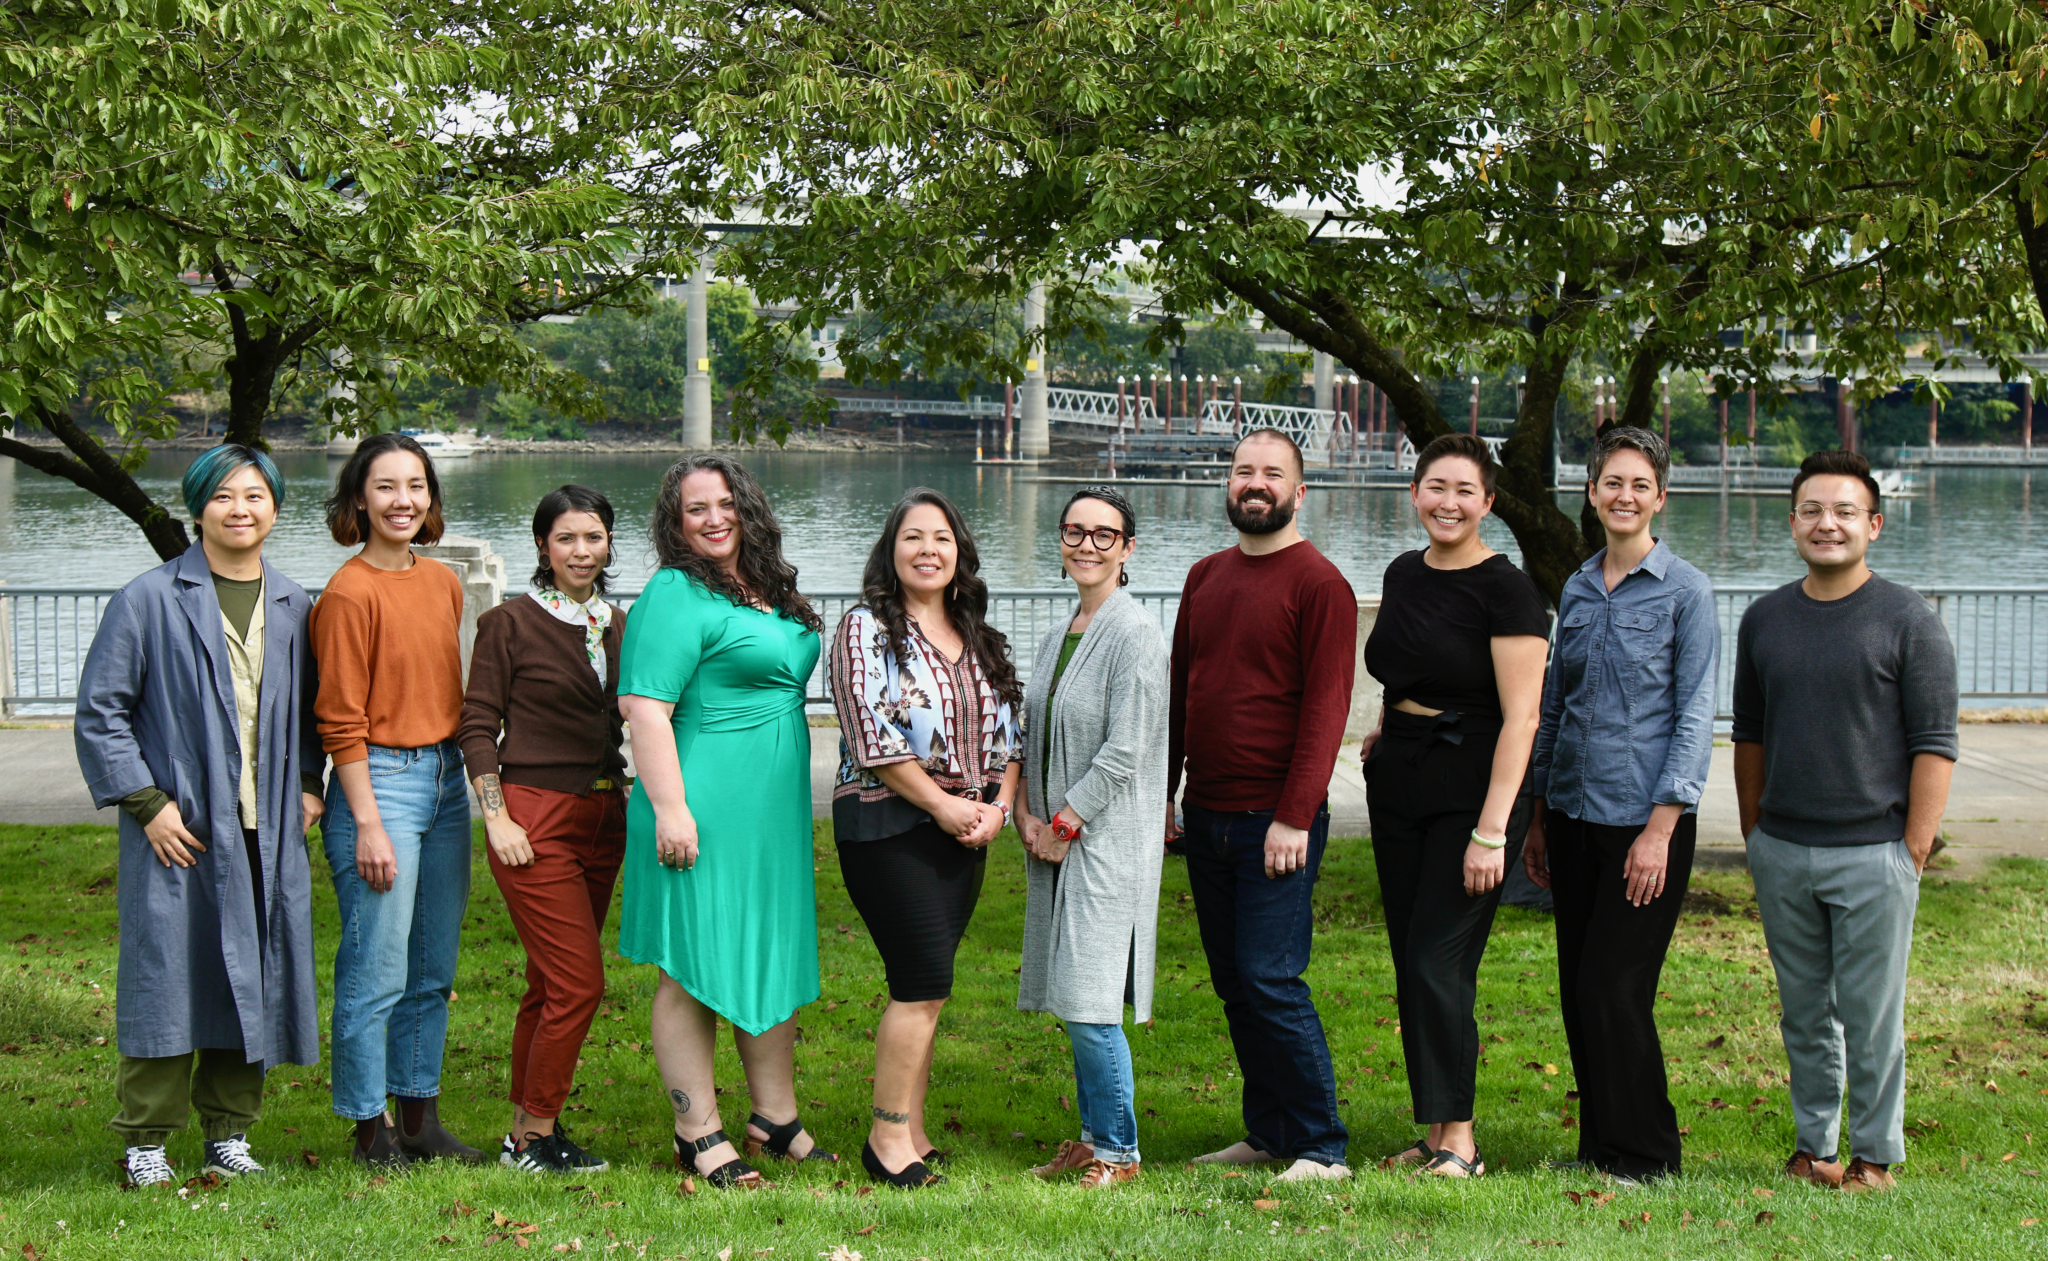 The Seeding Justice staff poses in front of trees along the Willamette River waterfront.